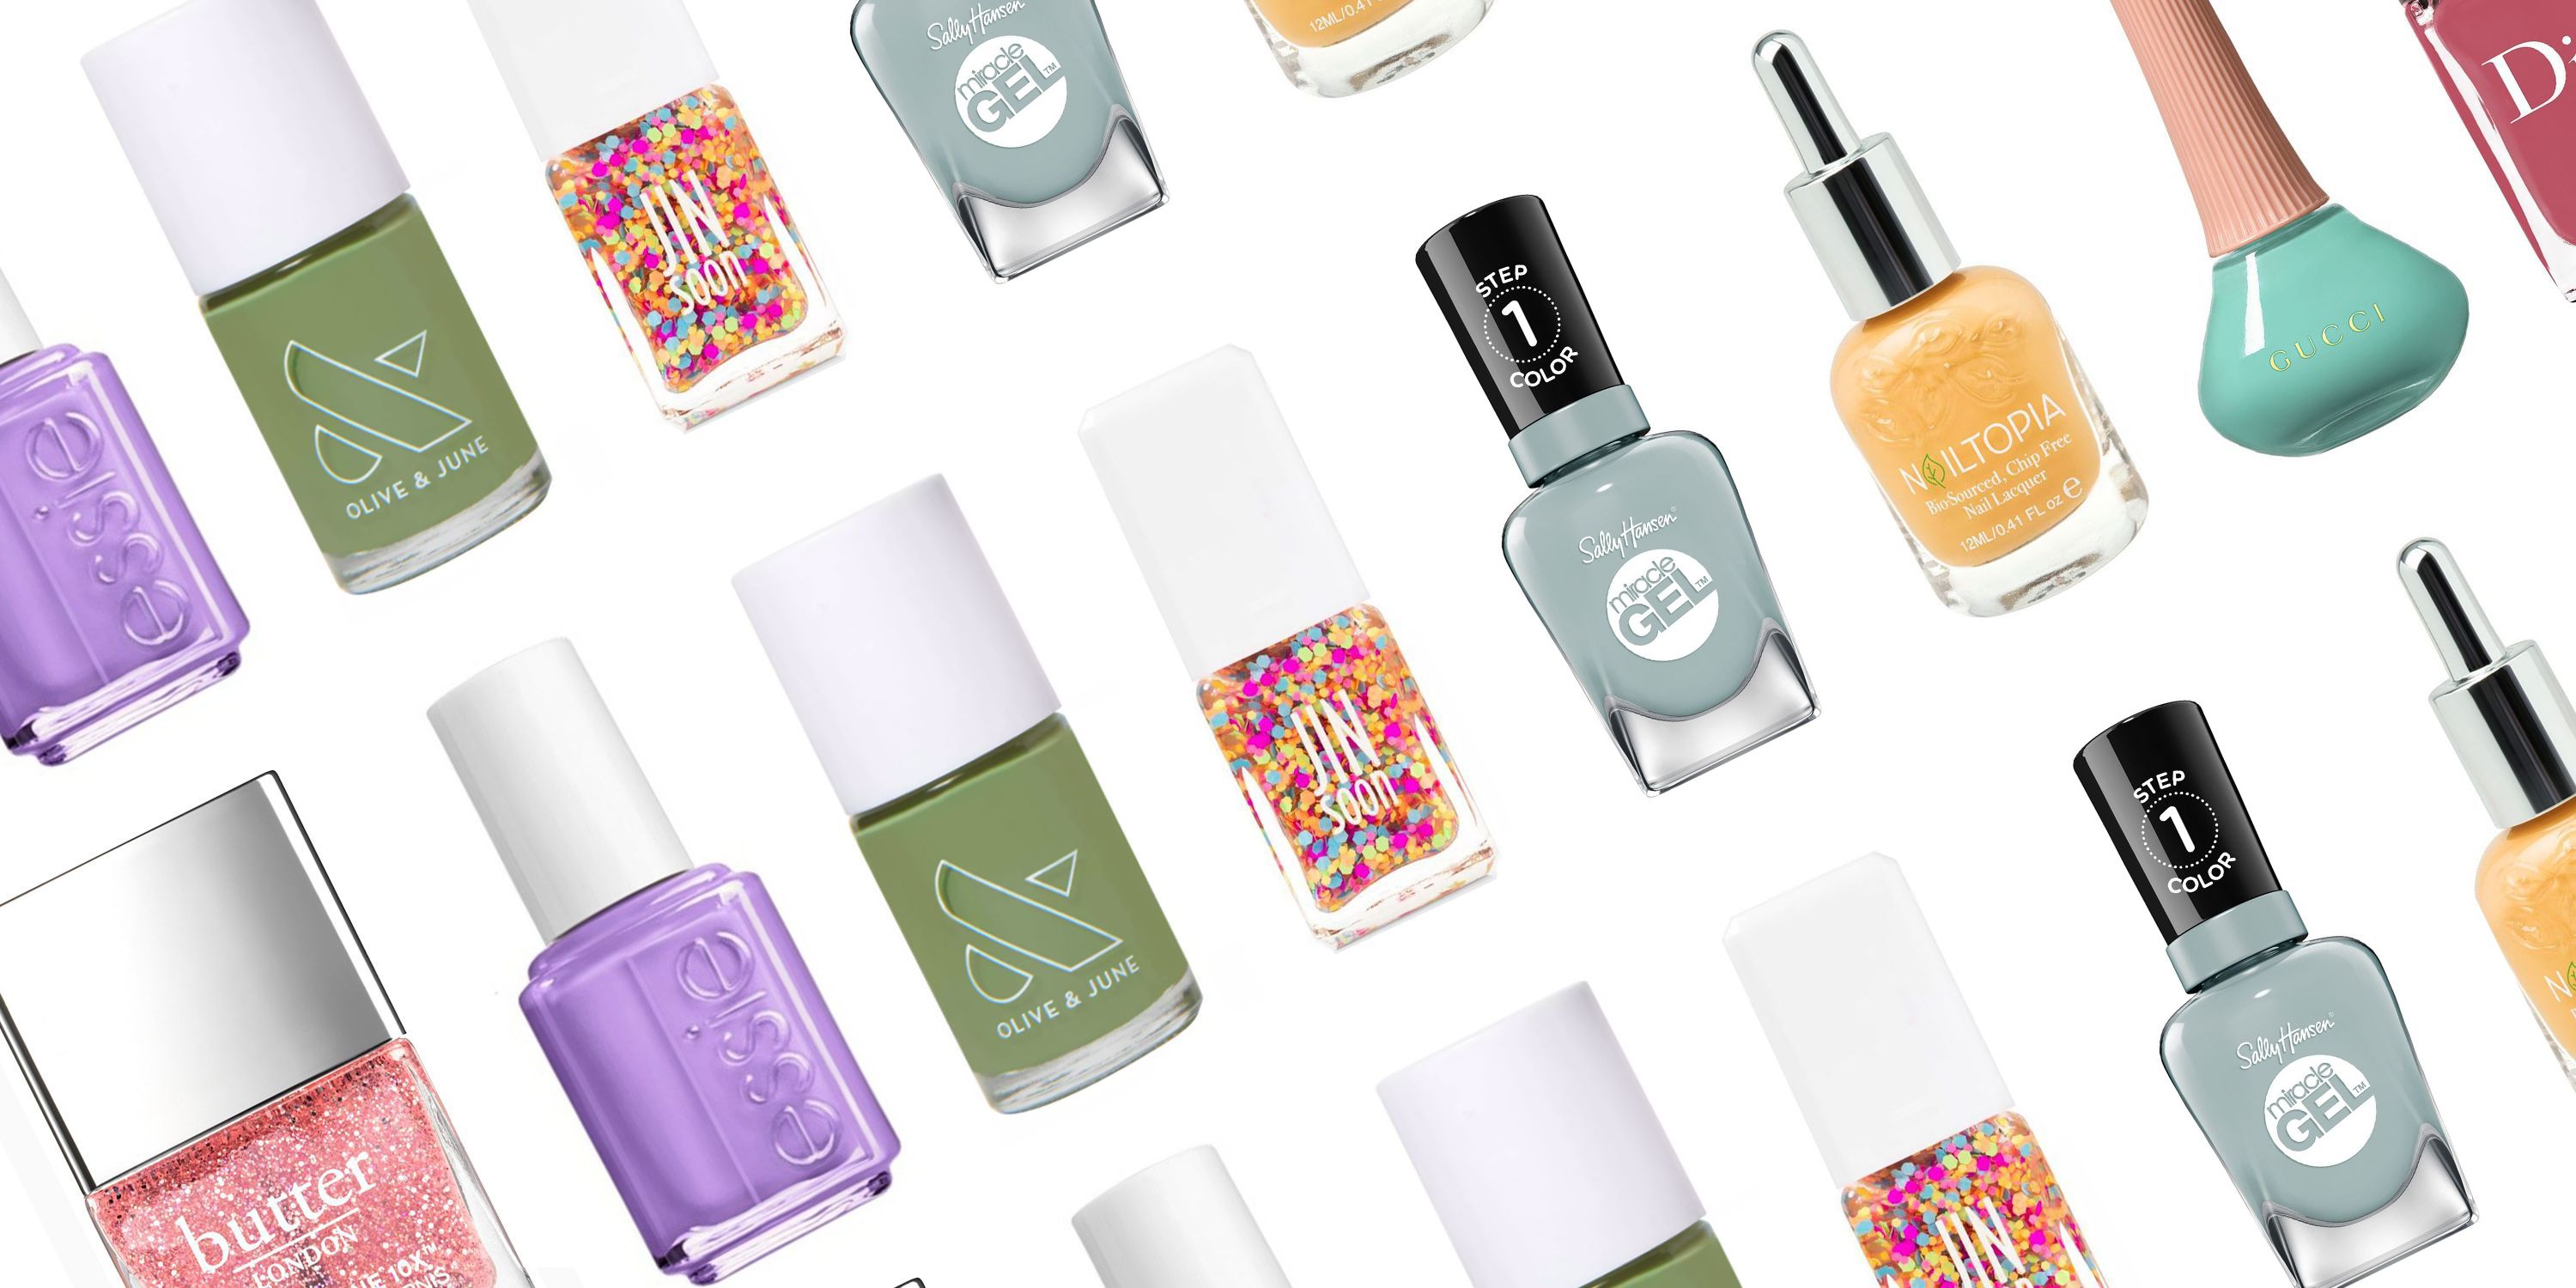 Nail Polish Color Trends For 2021 To Have In Your Vanity